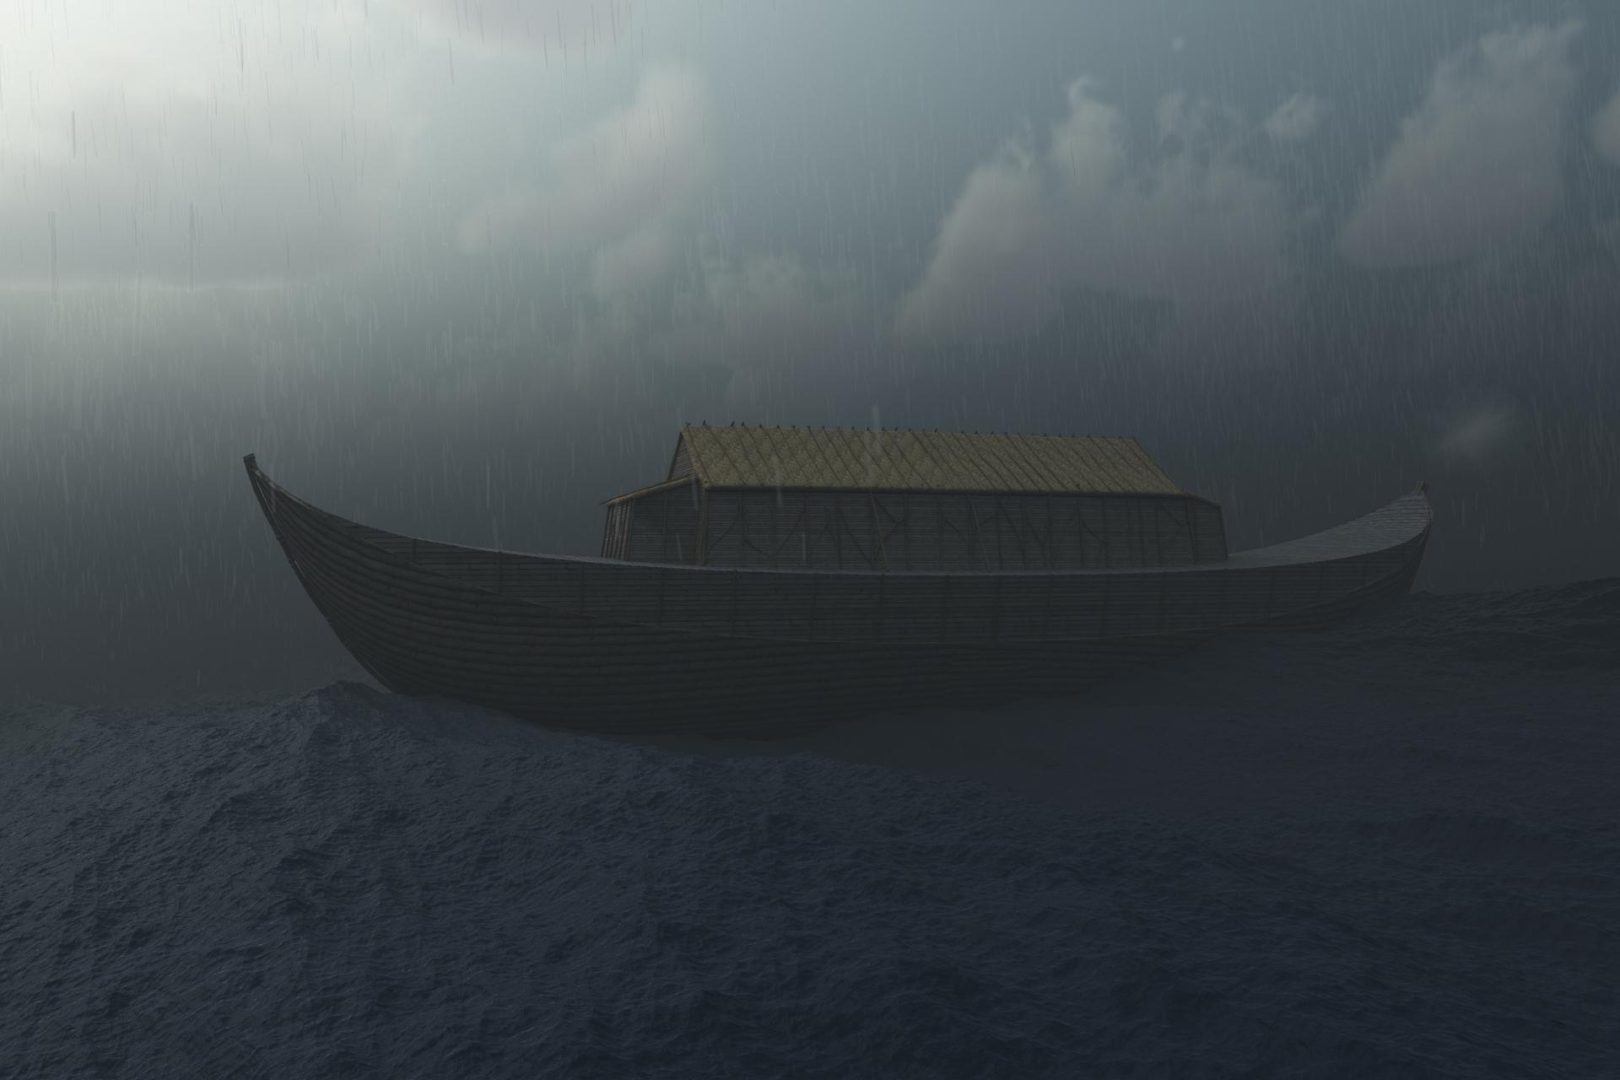 A dark image of a wooden boat out on the ocean.